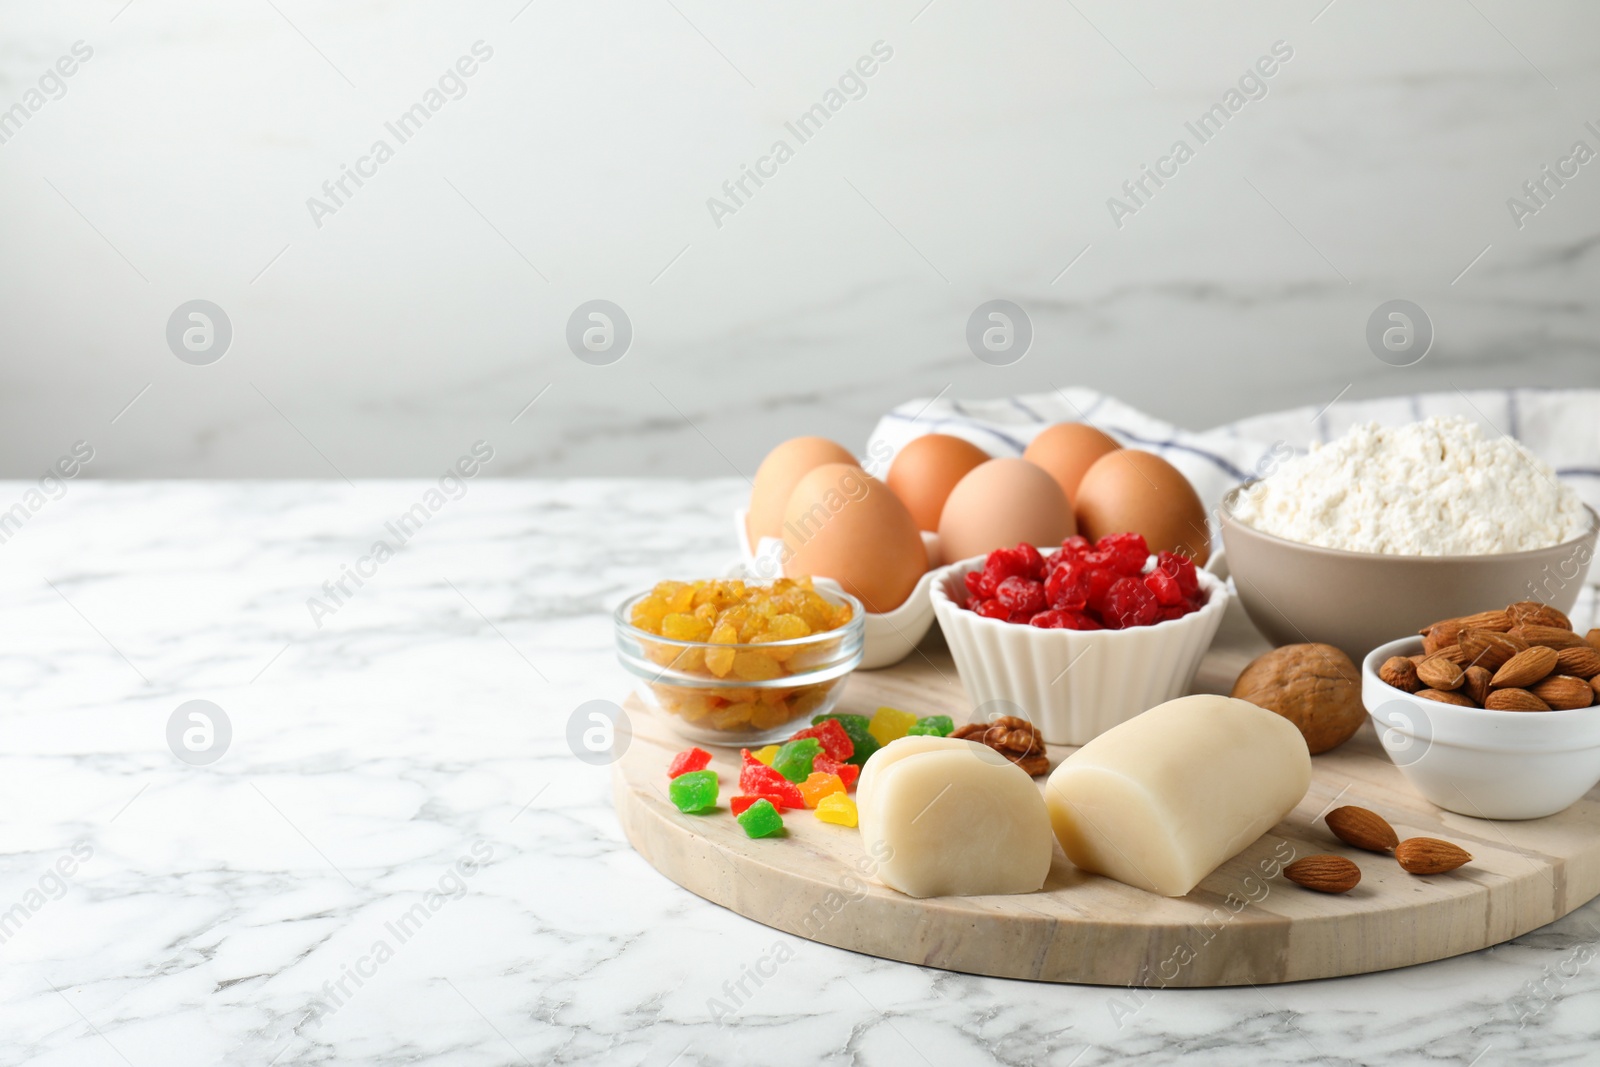 Photo of Marzipan and other ingredients for homemade Stollen on white marble table. Baking traditional German Christmas bread